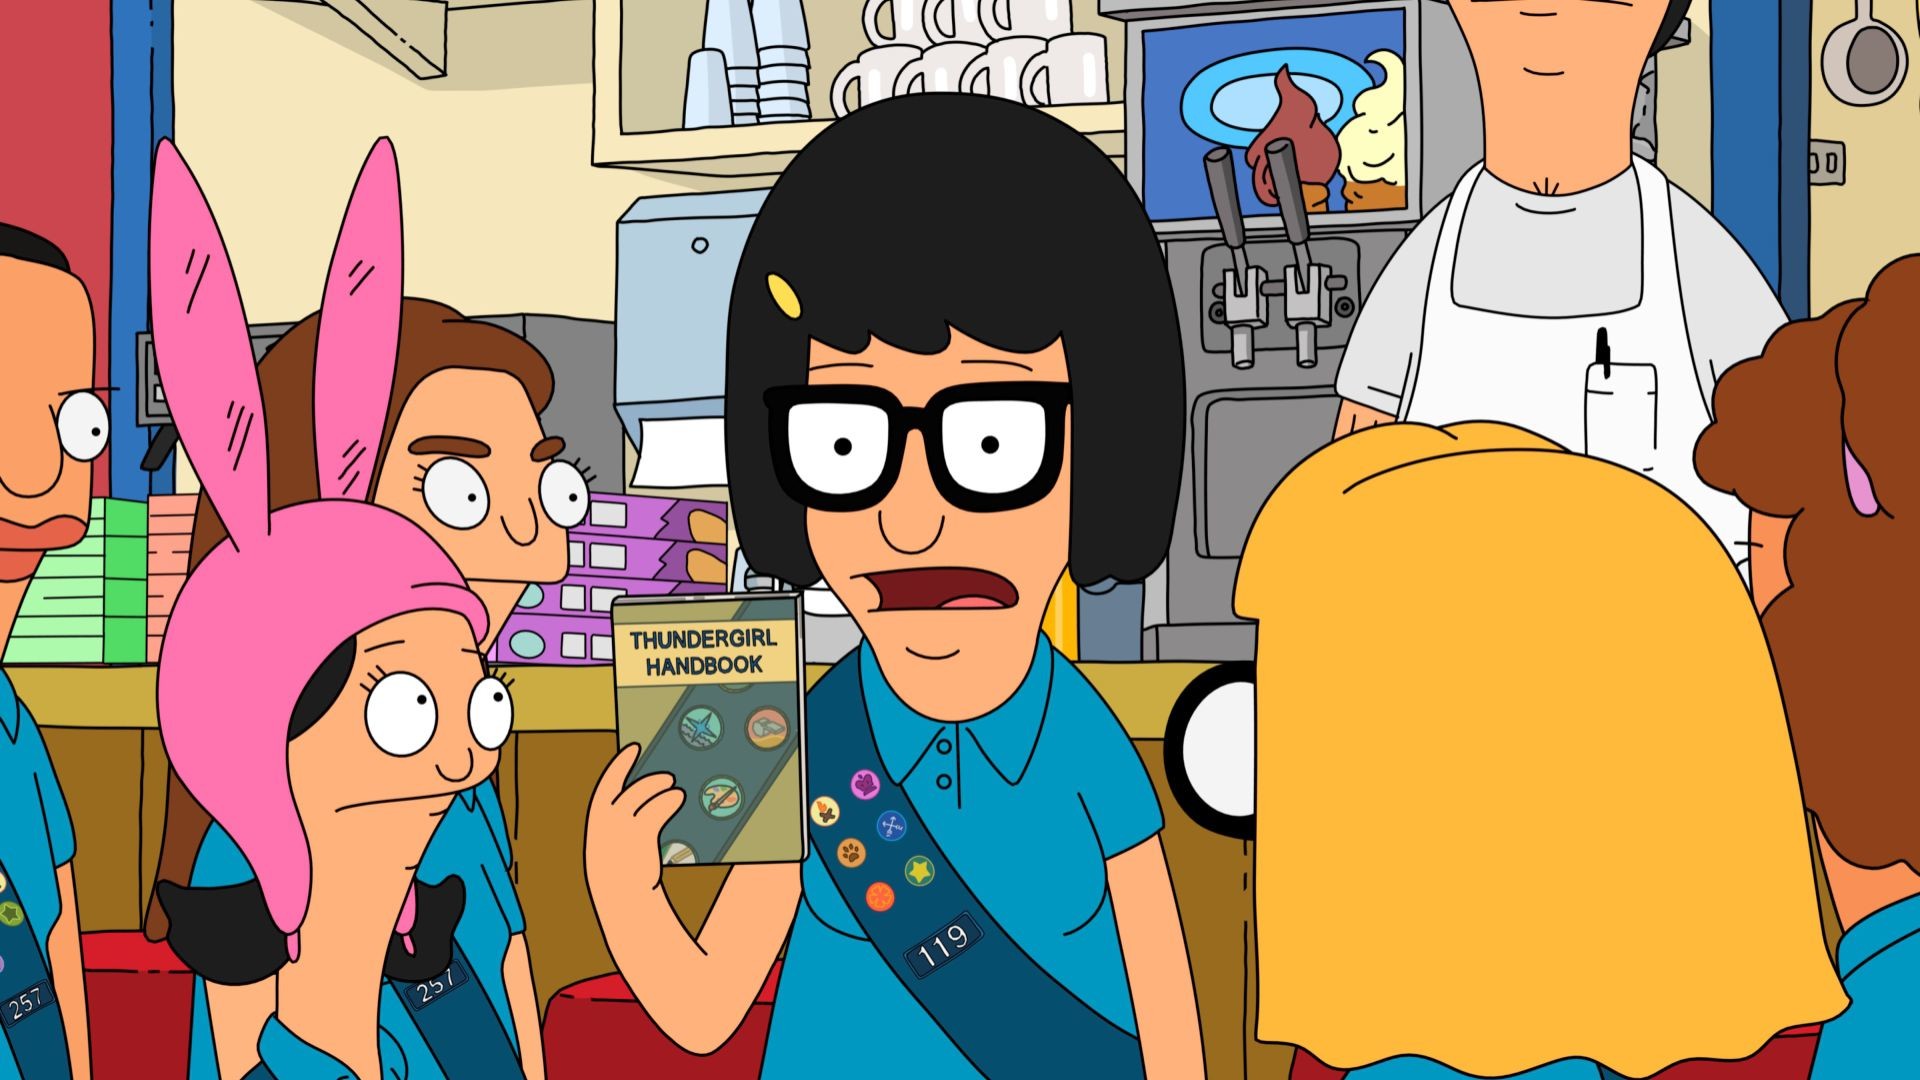 Bobs Burgers if it were an anime  rBobsBurgers